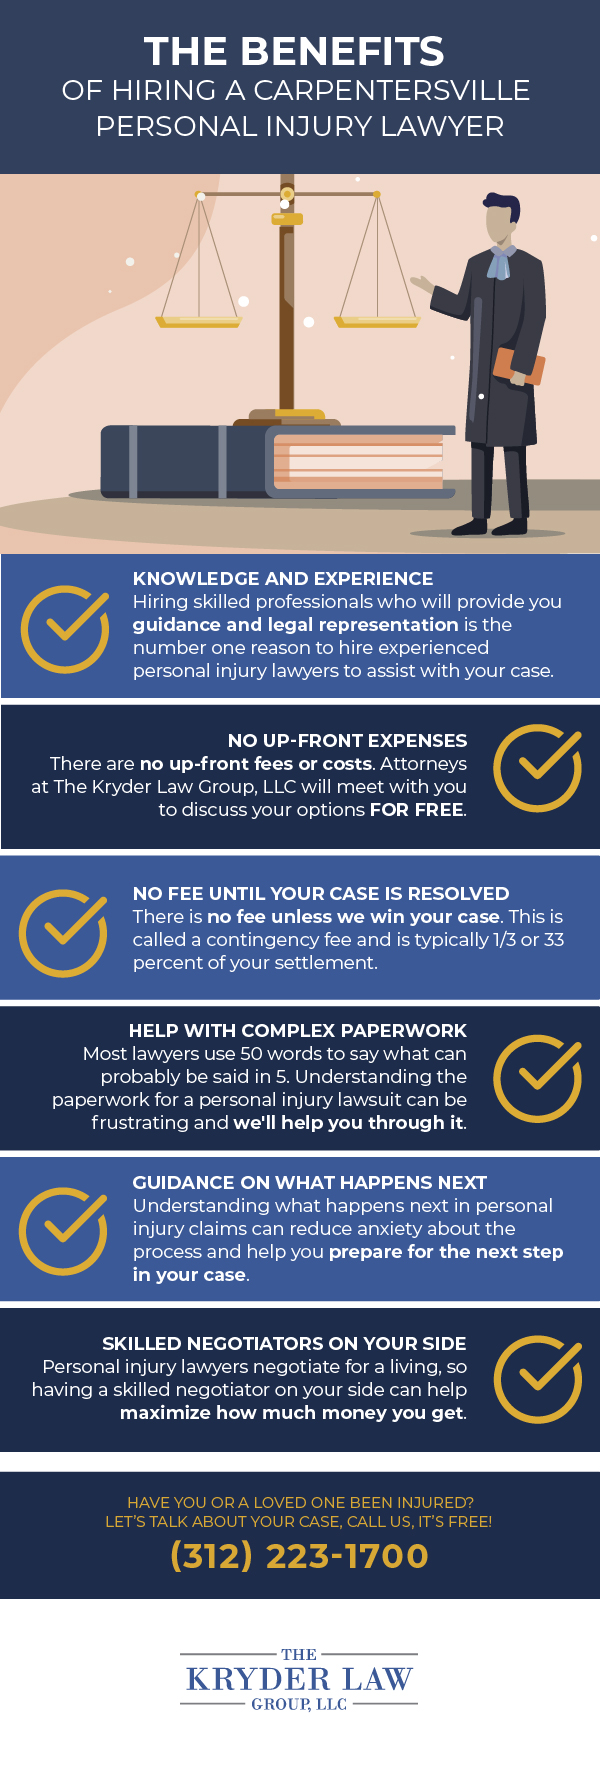 The Benefits of Hiring a Carpentersville Personal Injury Lawyer Infographic